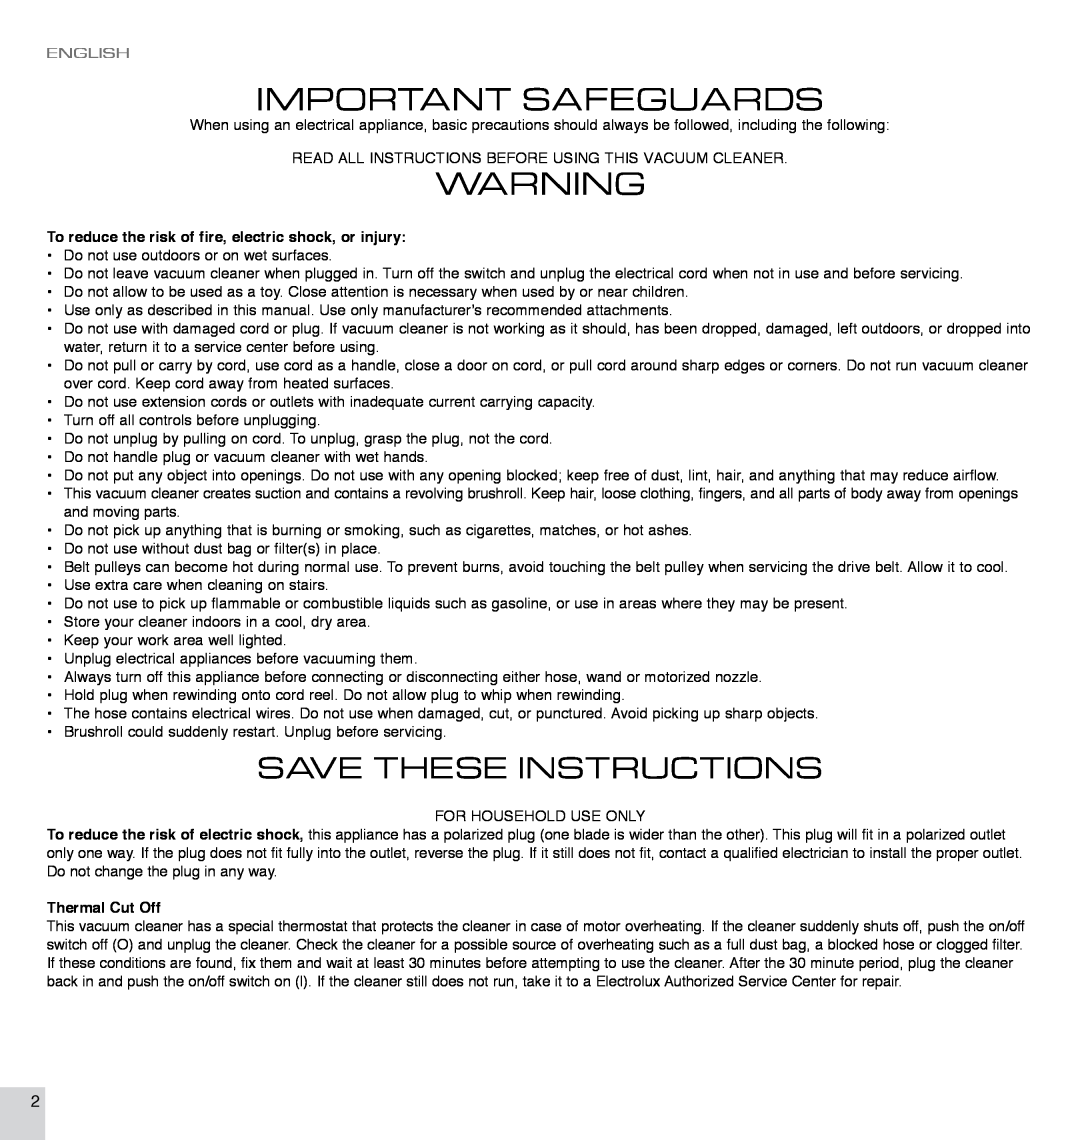 Electrolux EL7063A manual Important Safeguards, Save These Instructions, English, Thermal Cut Off 